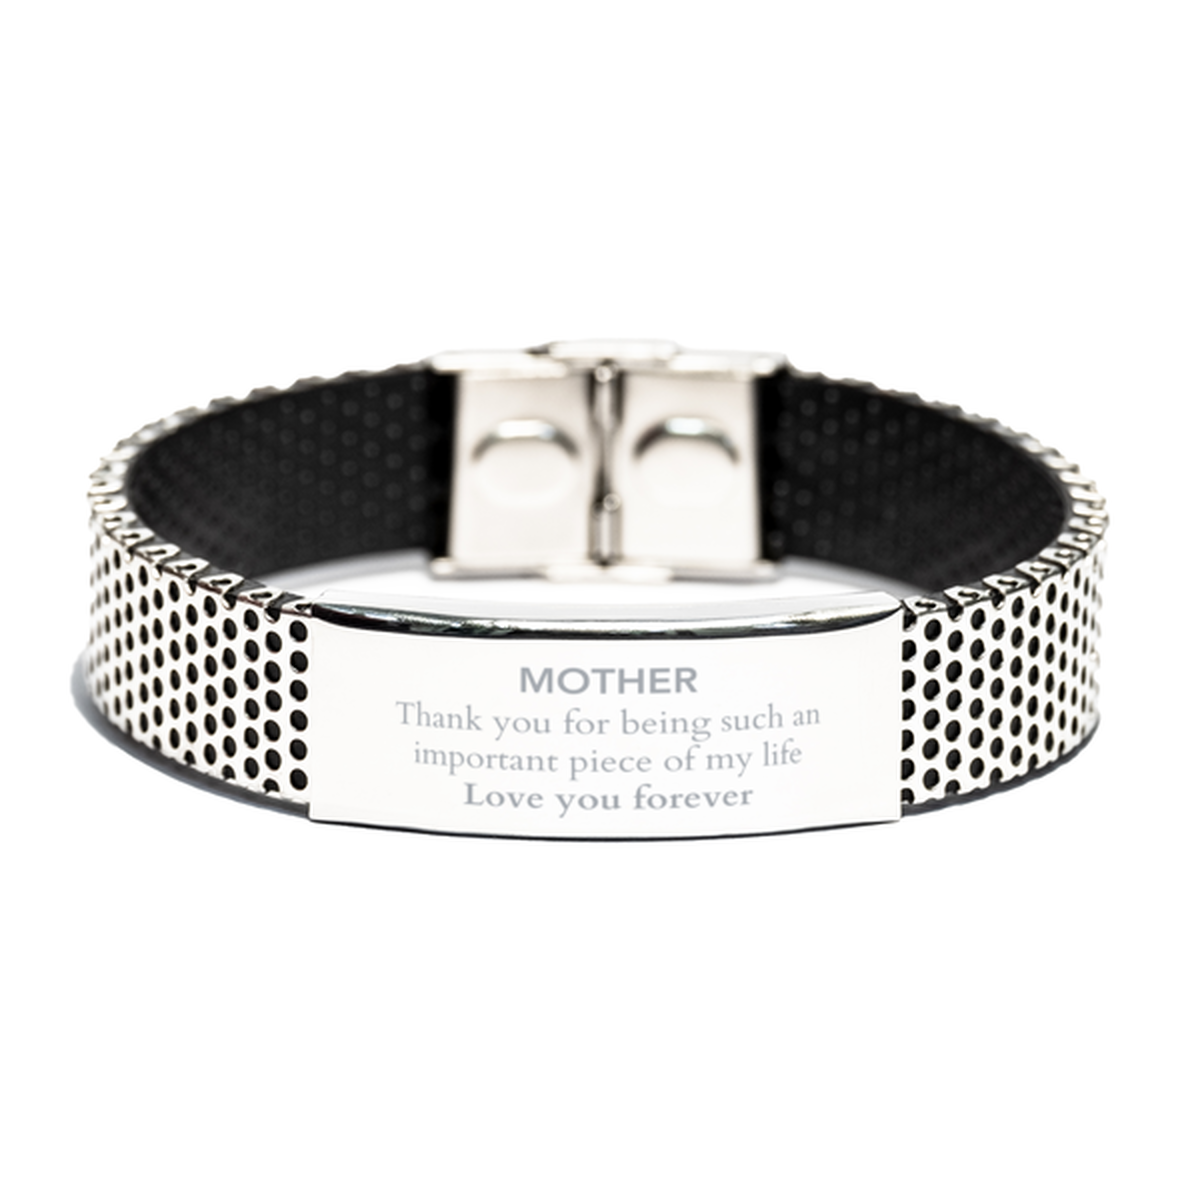 Appropriate Mother Stainless Steel Bracelet Epic Birthday Gifts for Mother Thank you for being such an important piece of my life Mother Christmas Mothers Fathers Day